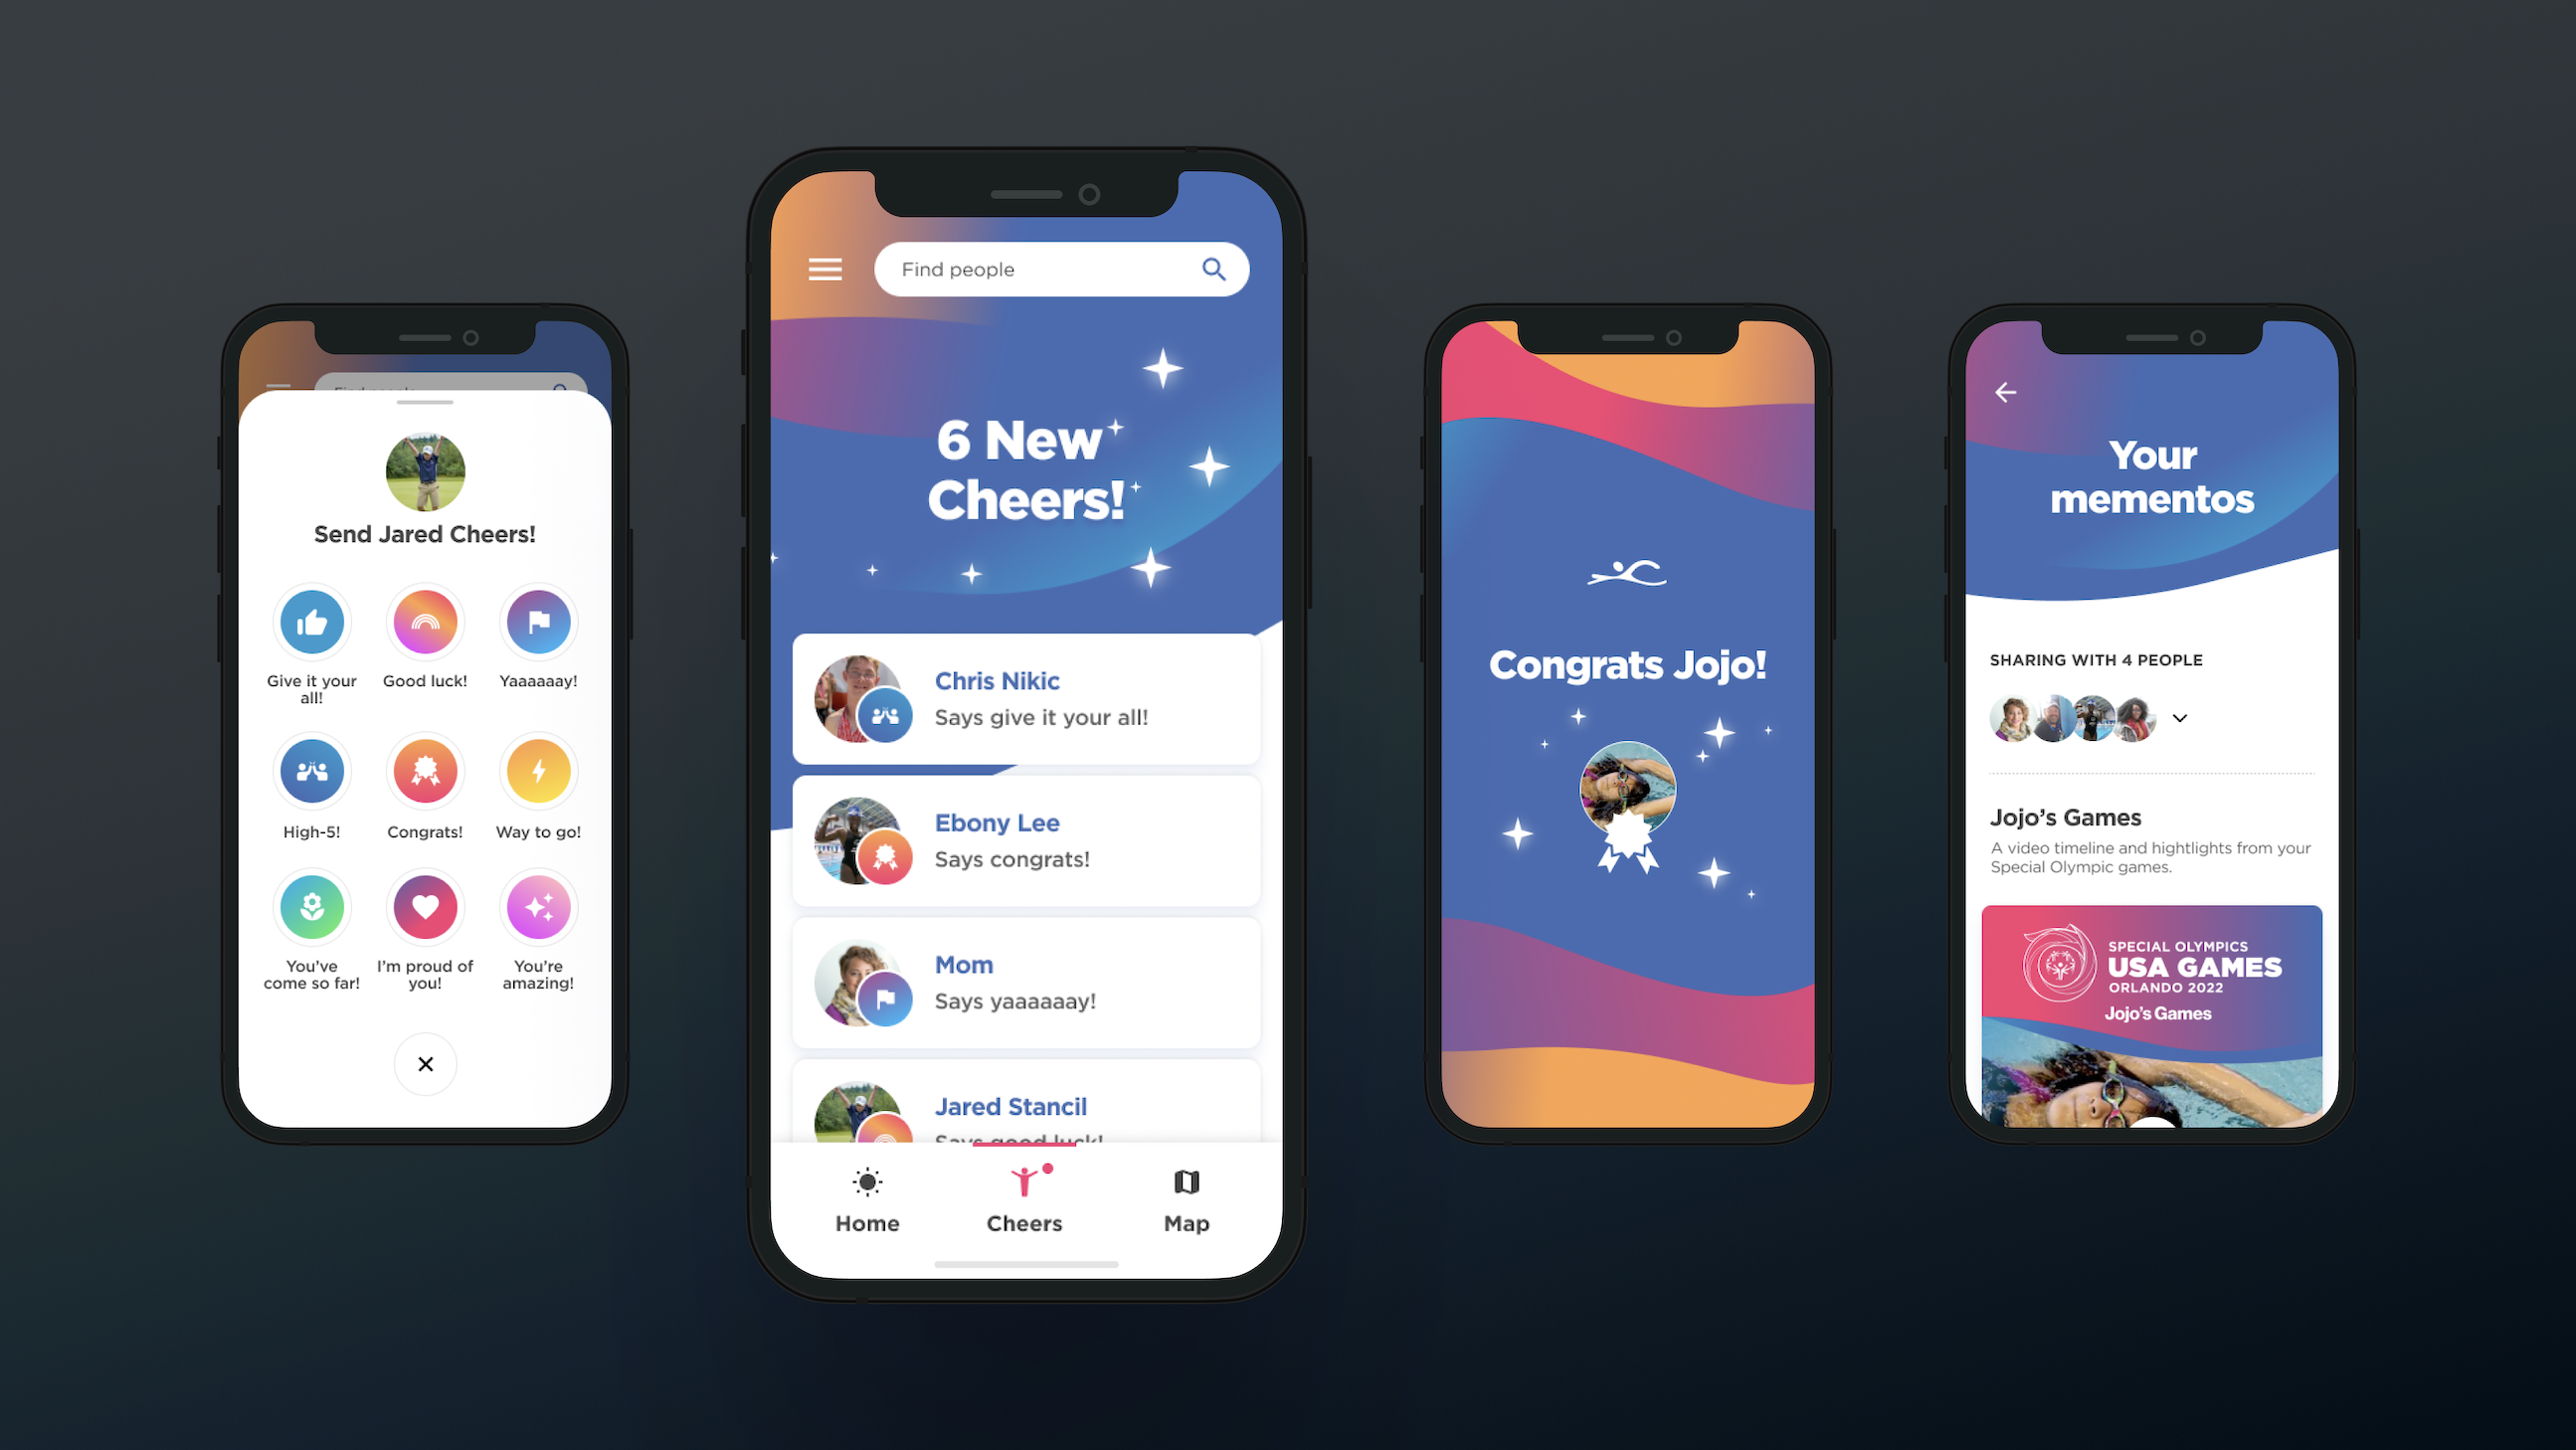 Athletes can easily send messages to their friends with Blink’s new design for the Special Olympics USA Games 2022 mobile app.